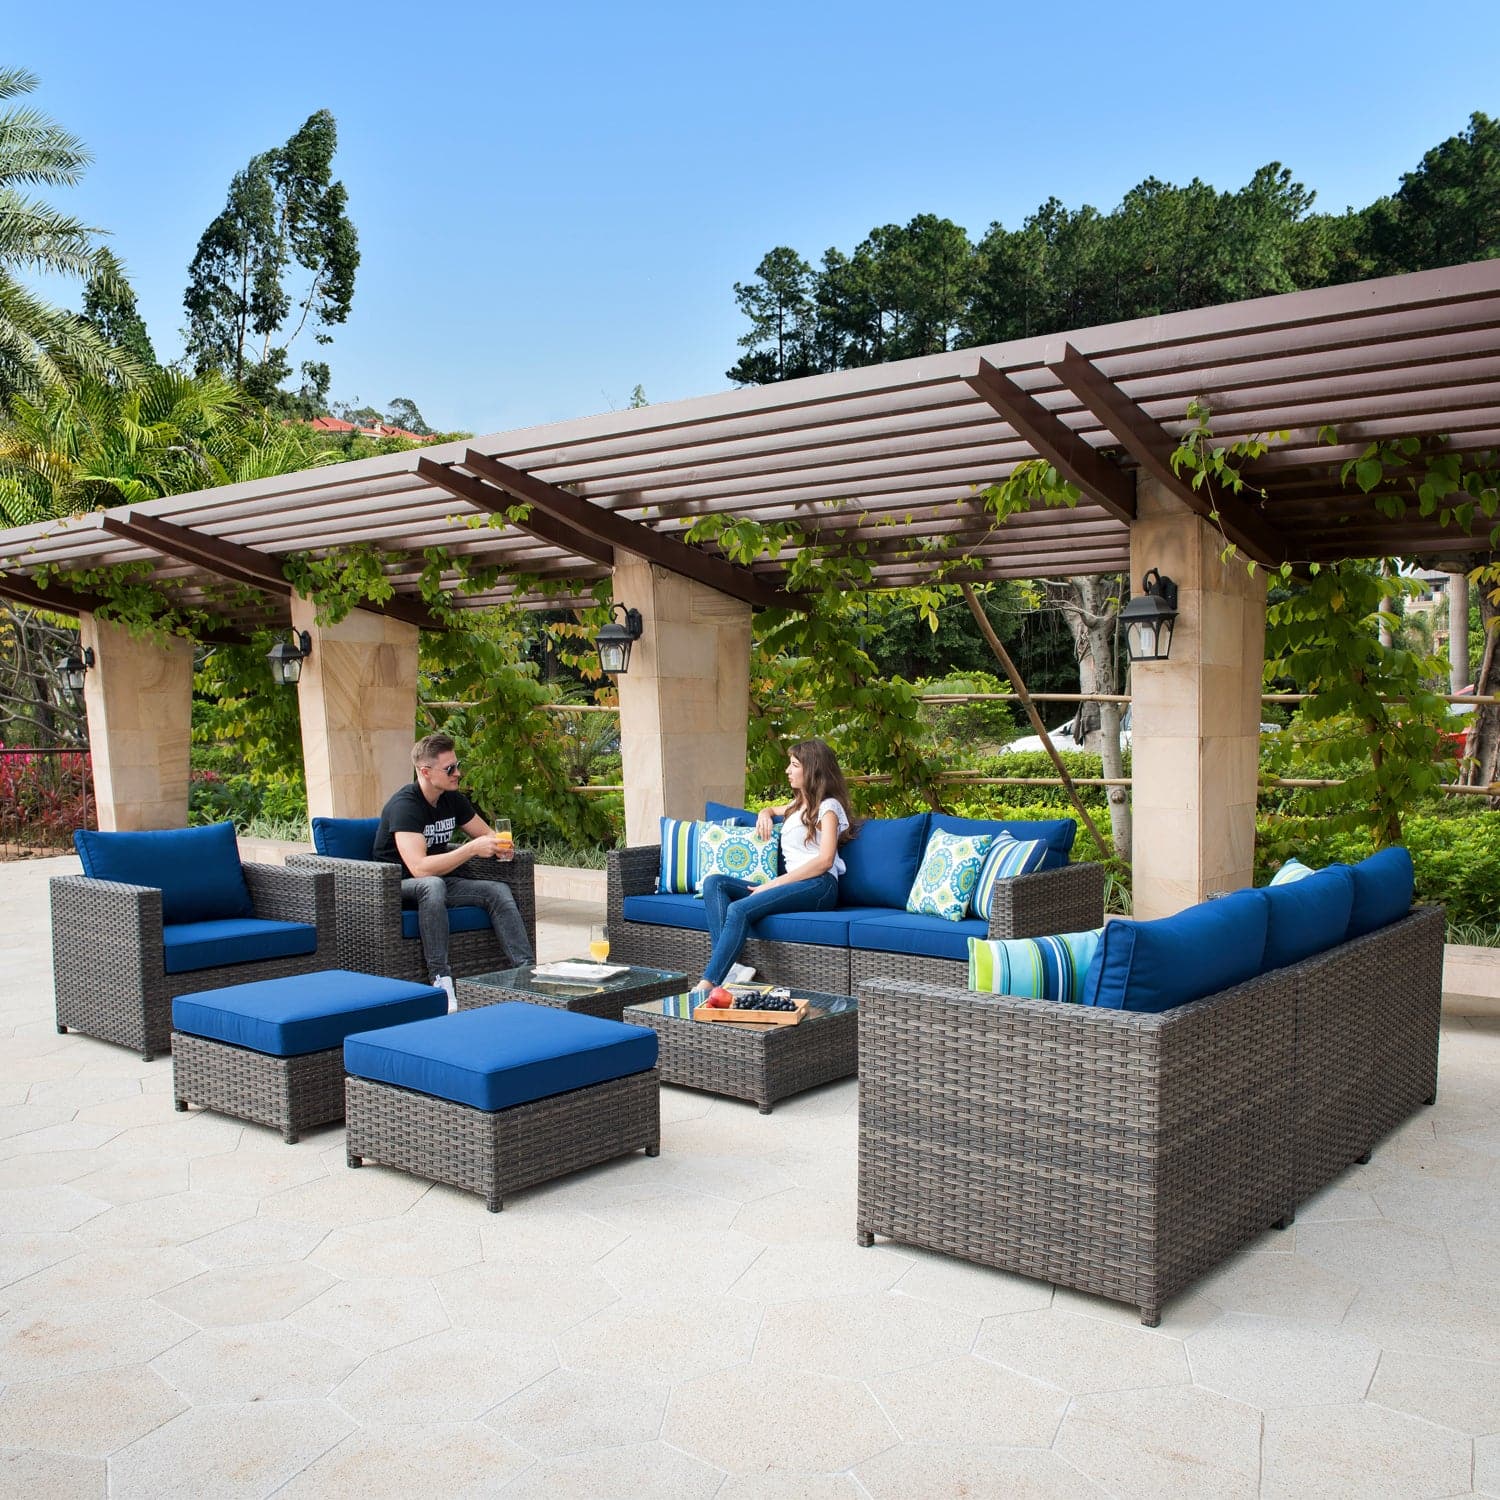 Ovios Patio Furniture Set Bigger Size 12-Piece, King Series, Fully Assembled